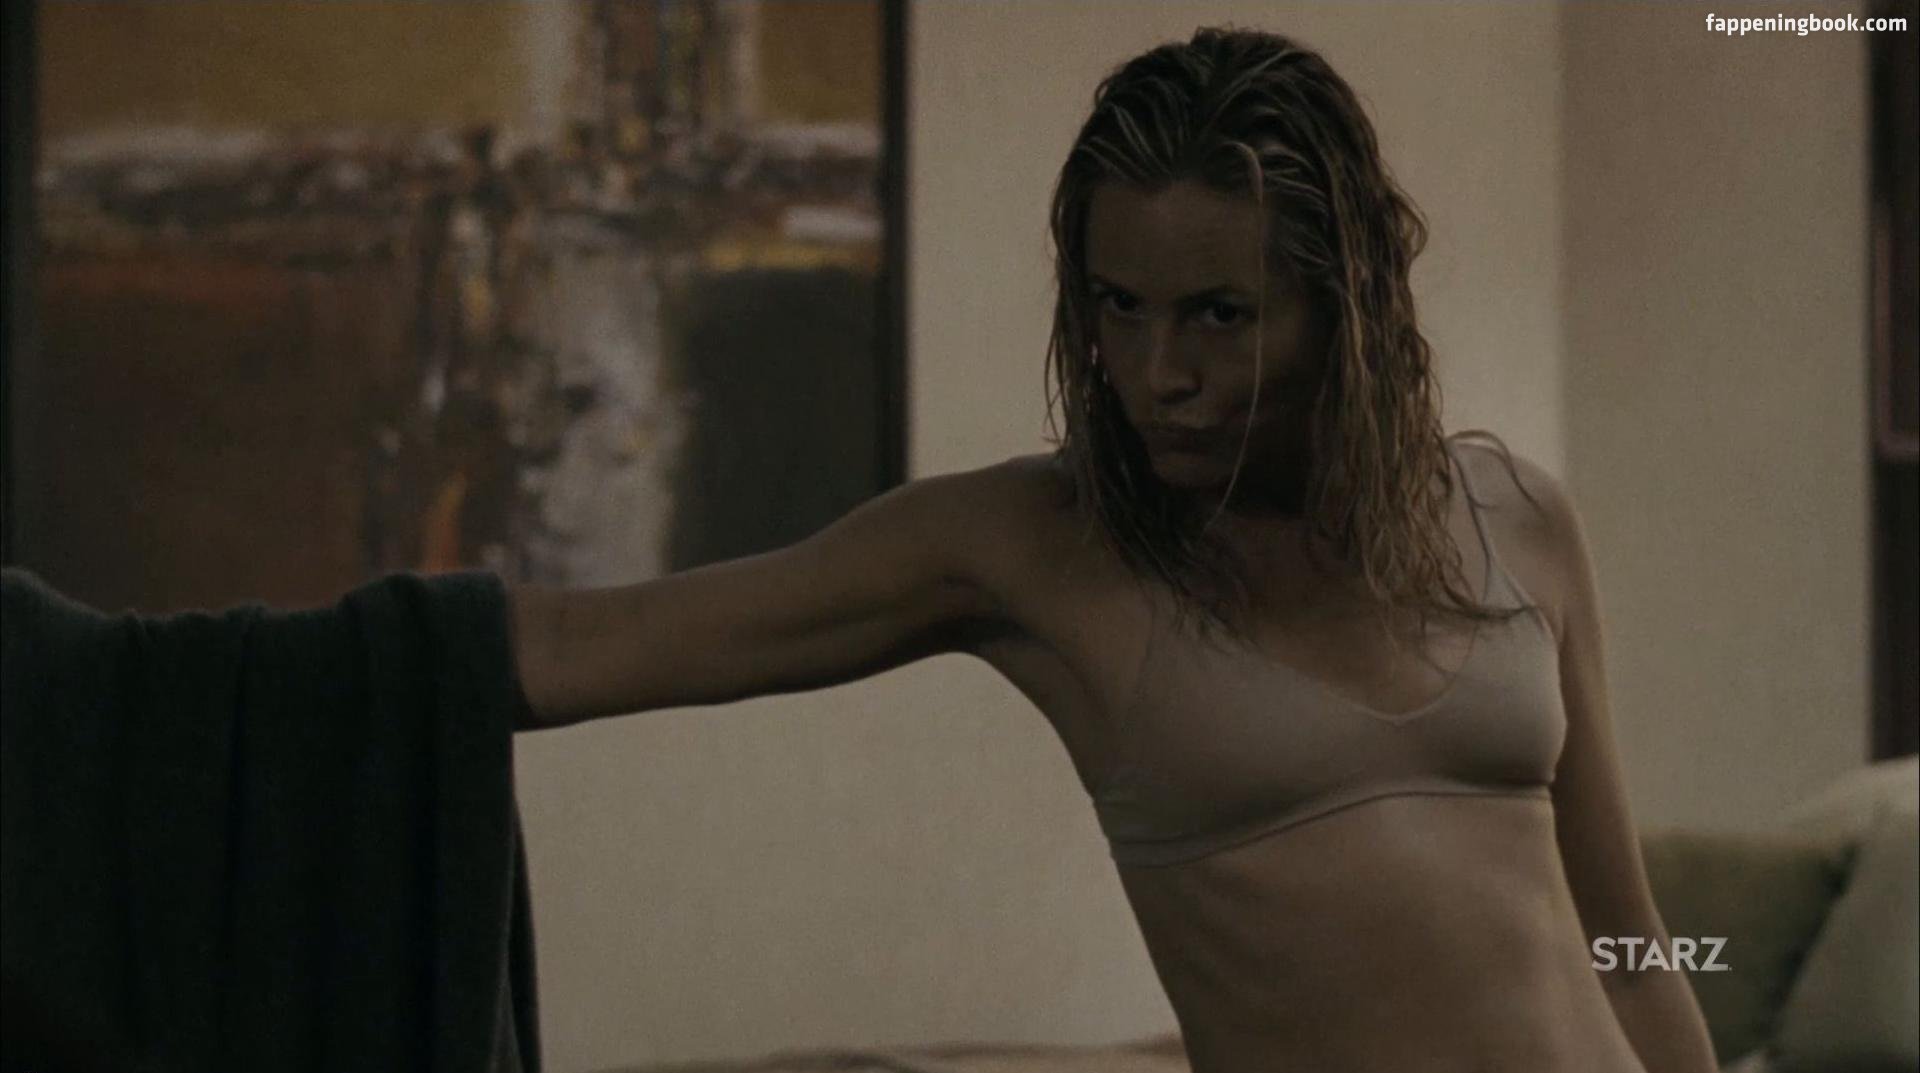 Maria Bello Nude, The Fappening - Photo #362103 - FappeningBook.